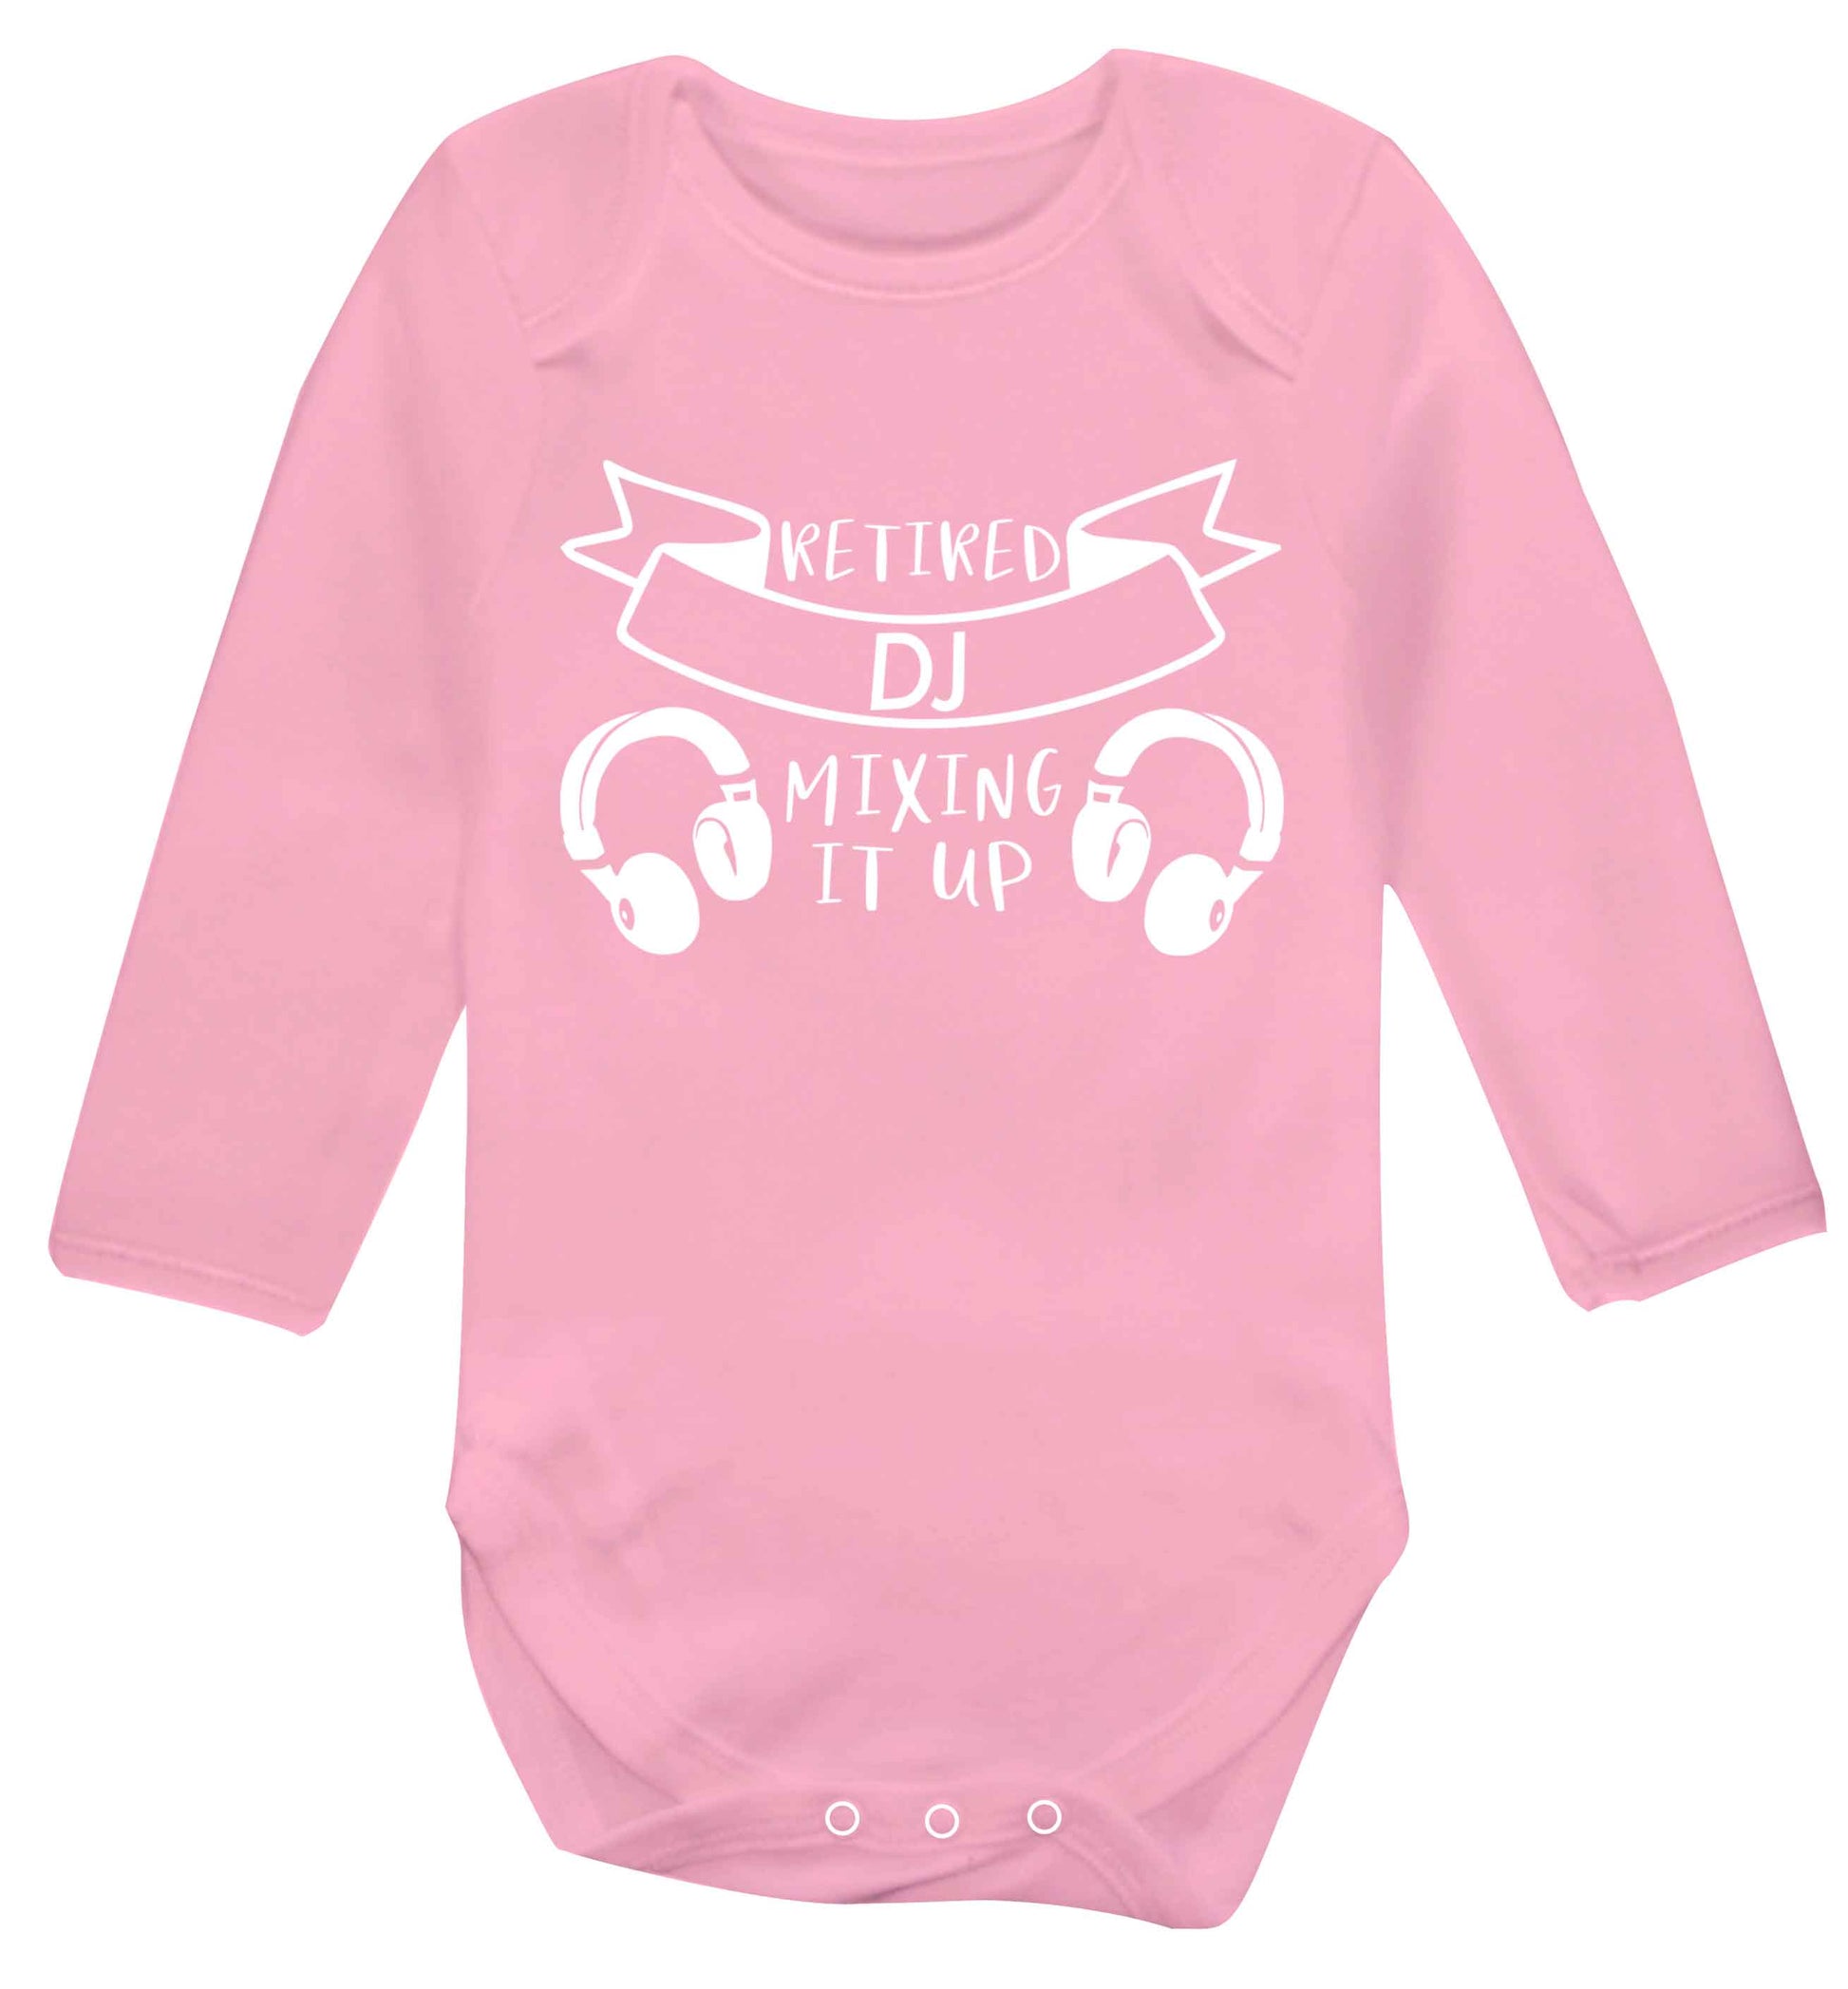 Retired DJ mixing it up Baby Vest long sleeved pale pink 6-12 months